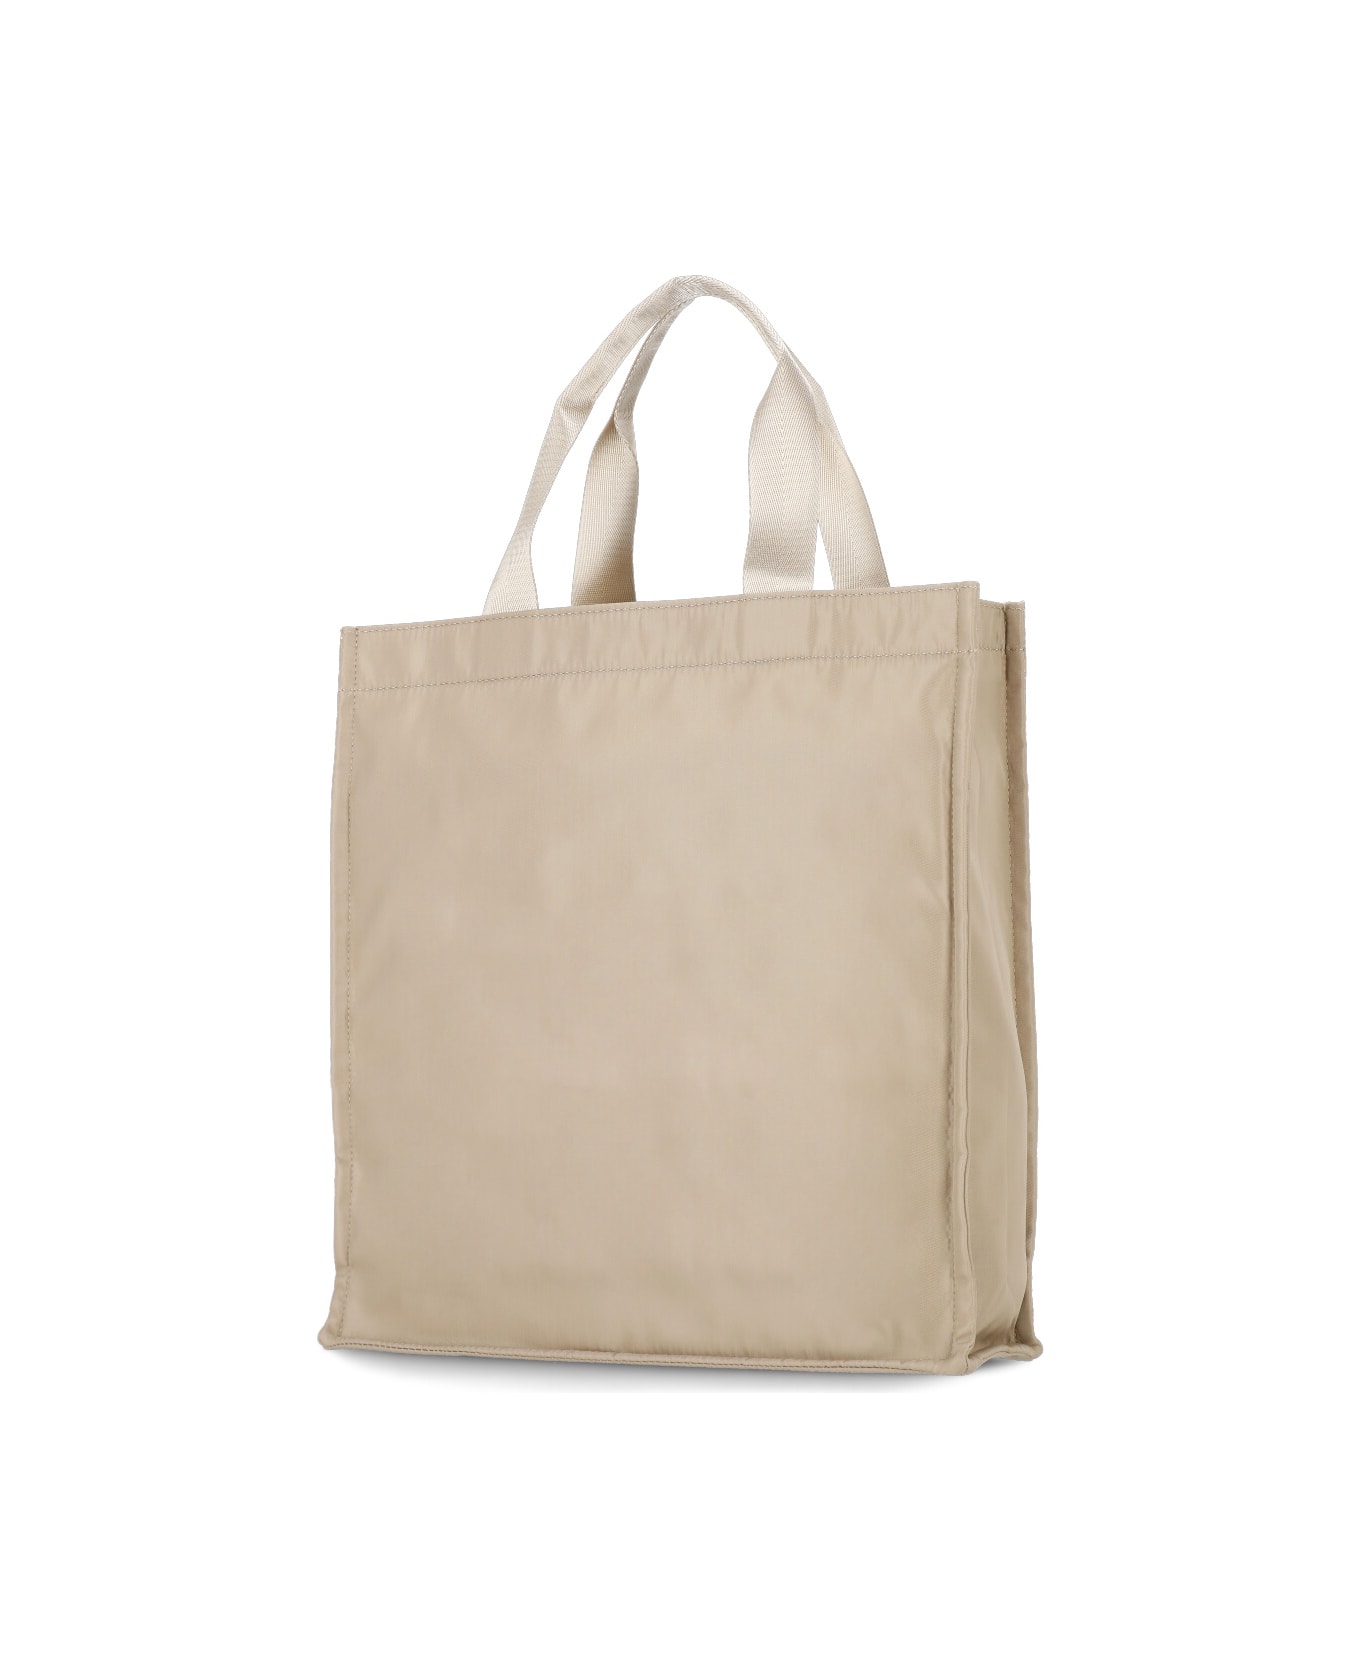 MSGM Tote Shopping Bag - Beige トートバッグ